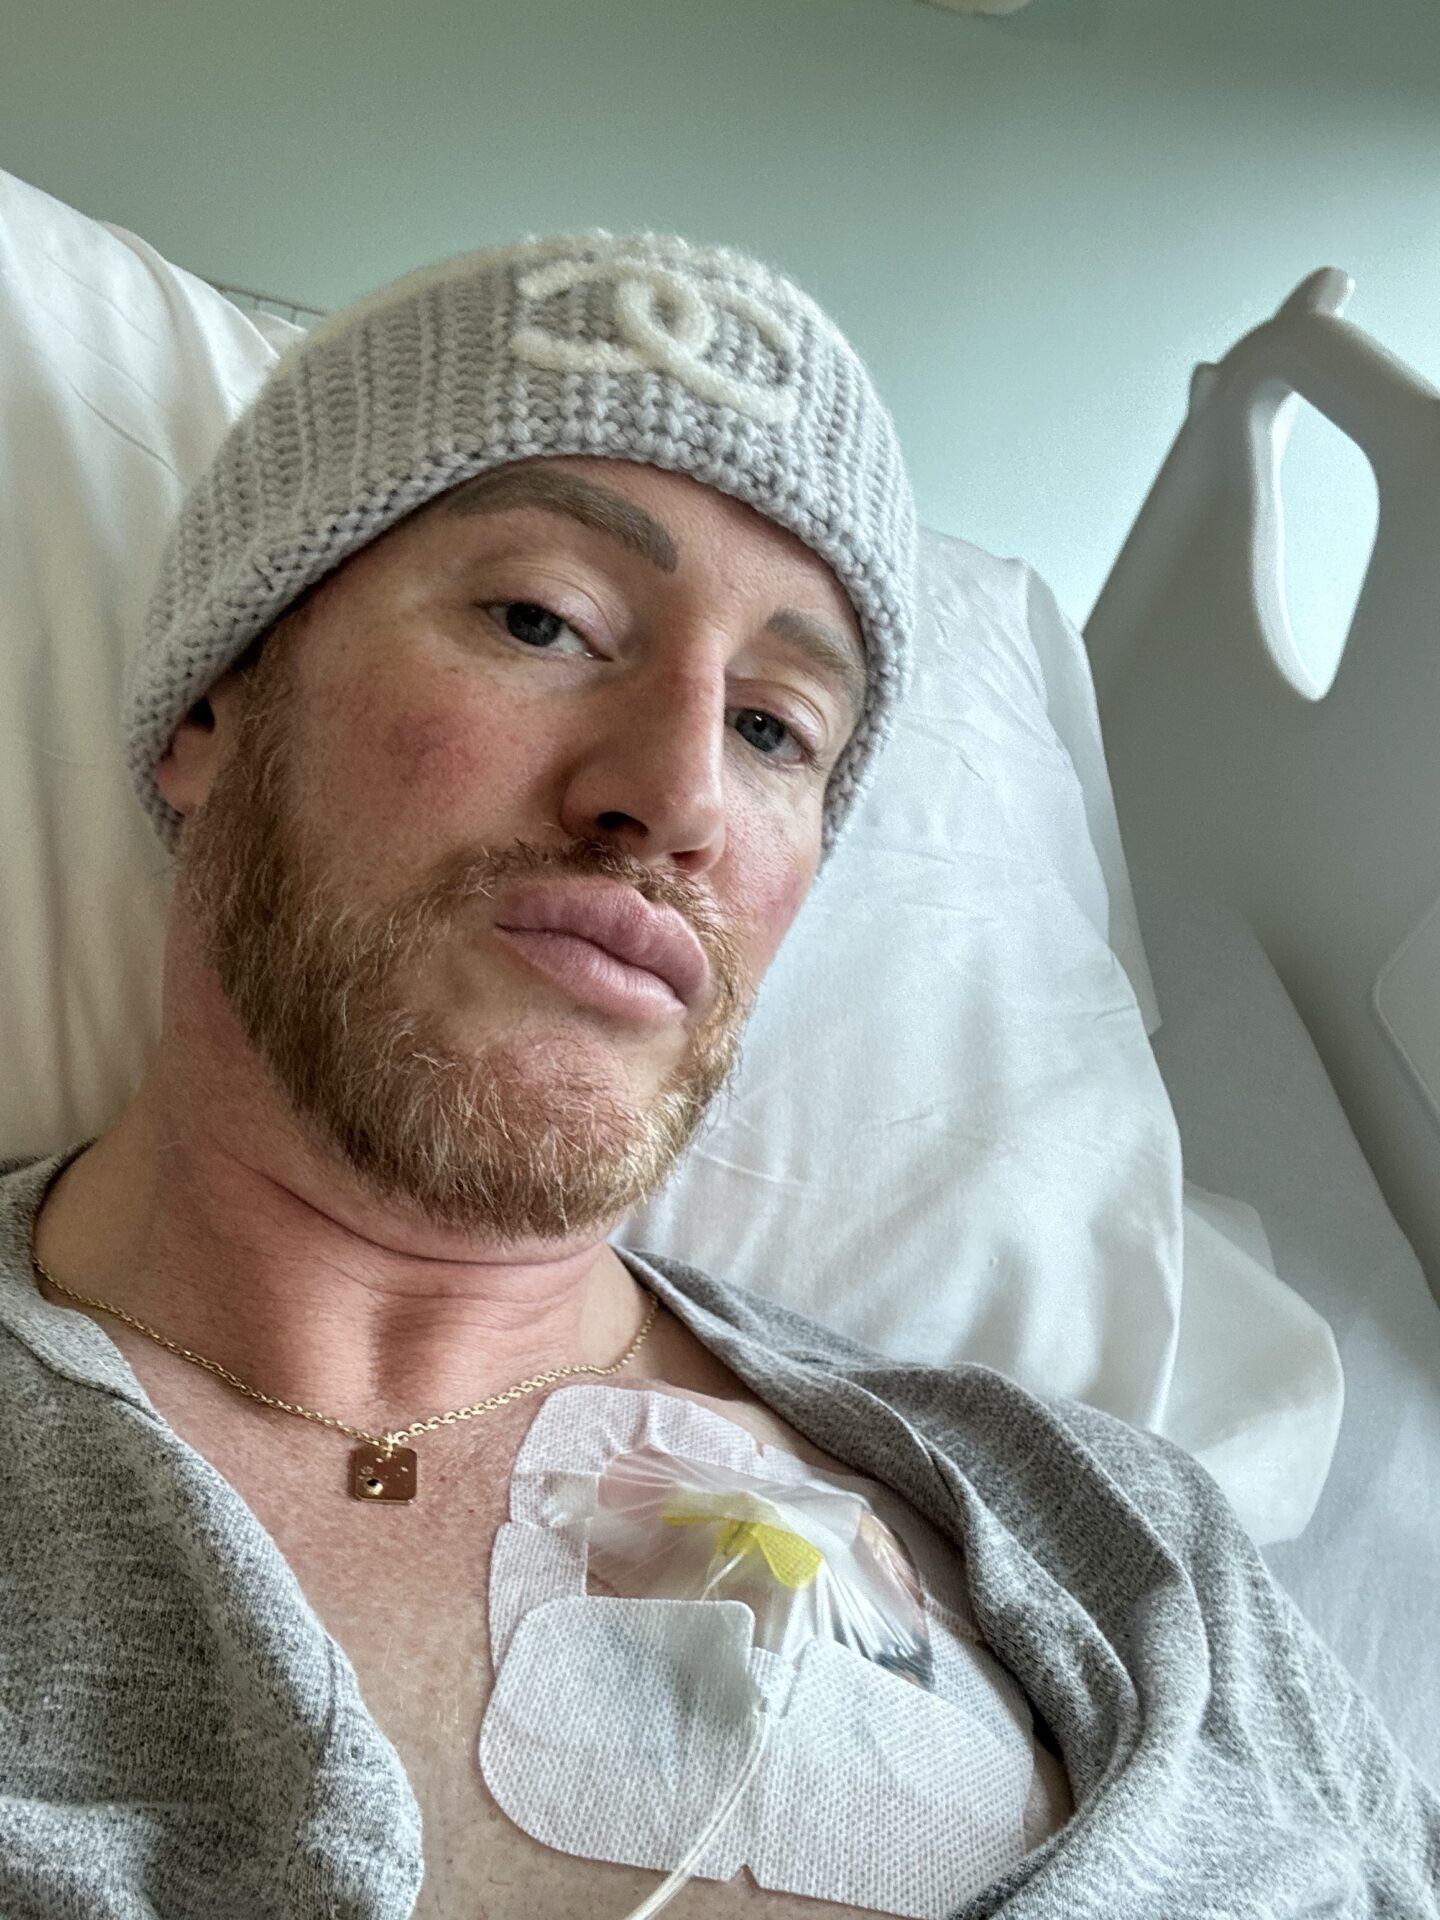 Kyle in the hospital with stage 4 colorectal cancer